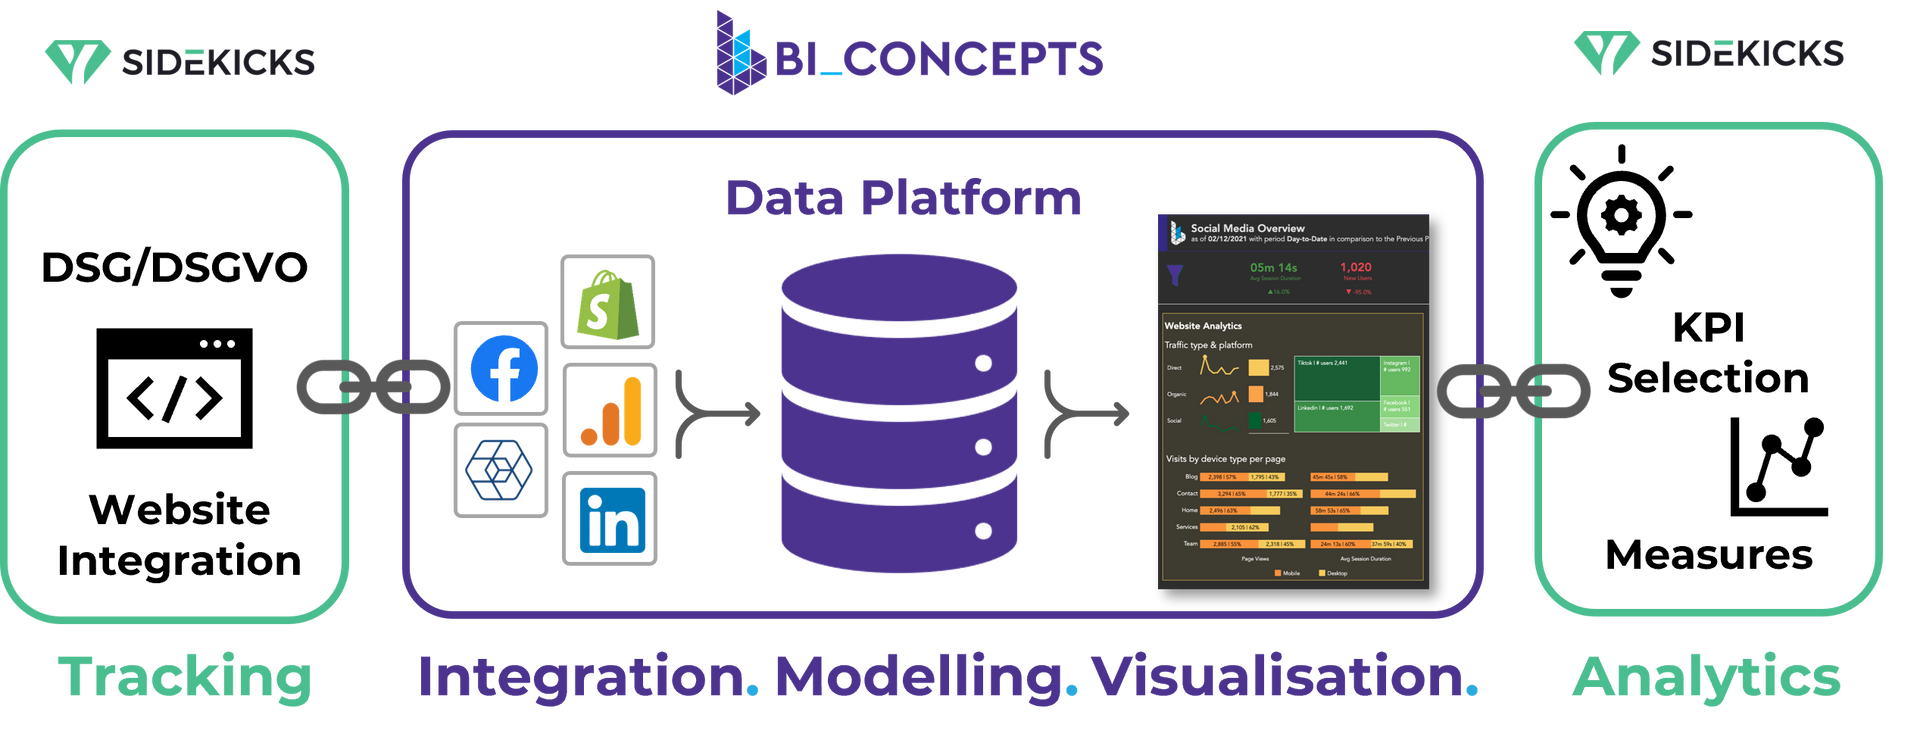 Collaboration Overview Sidekicks and BI Concepts